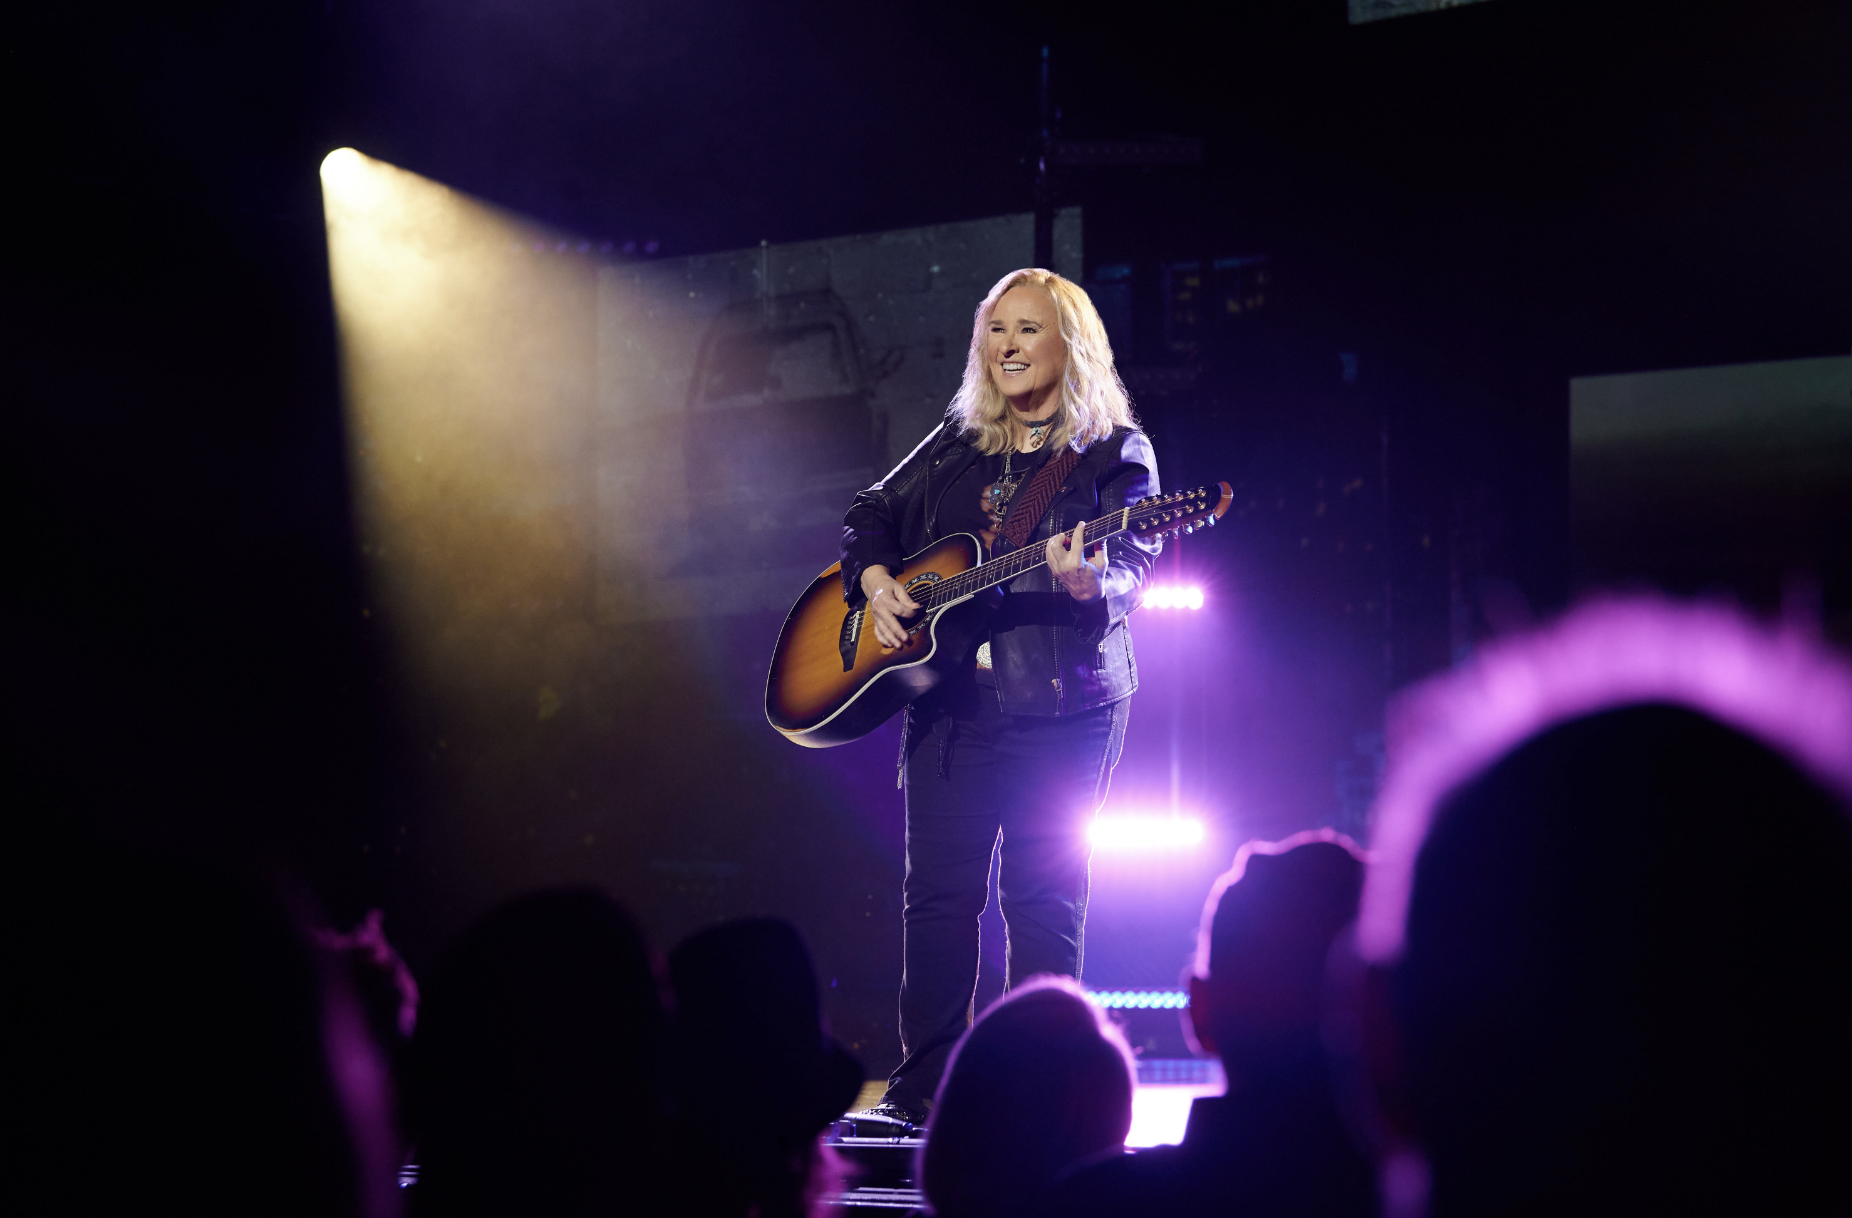 Melissa Etheridge Comes To Broadway - 9 weeks only - This Fall with MY WINDOW; Begins Sept 14 at Circle in the Square Theatre